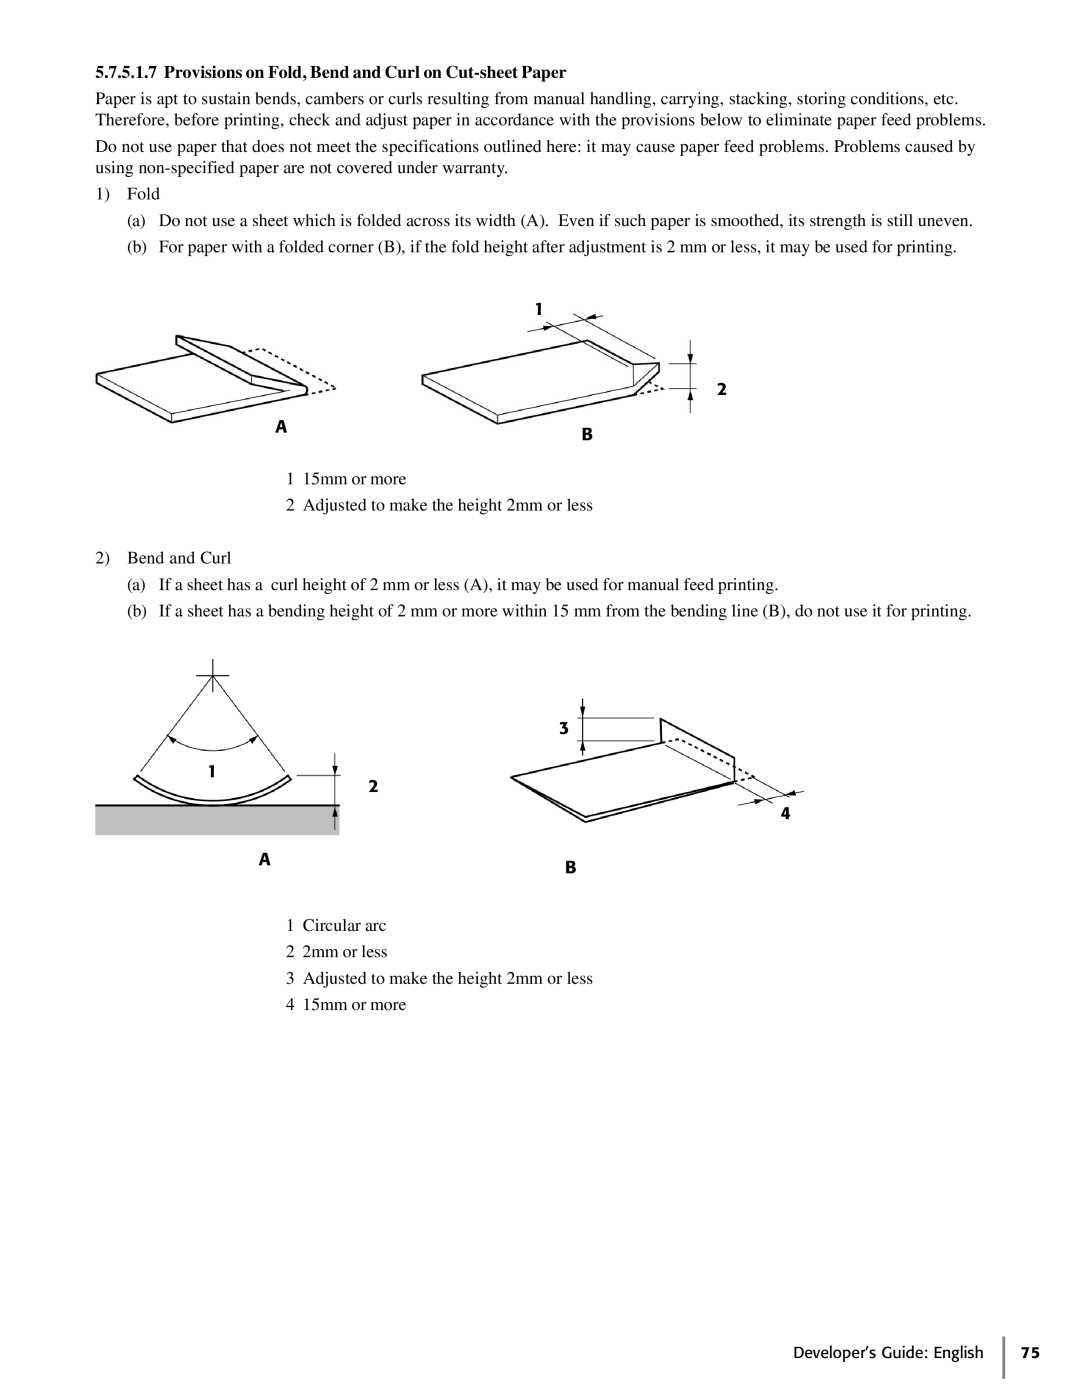 Oki 425S manual Provisions on Fold, Bend and Curl on Cut-sheet Paper 